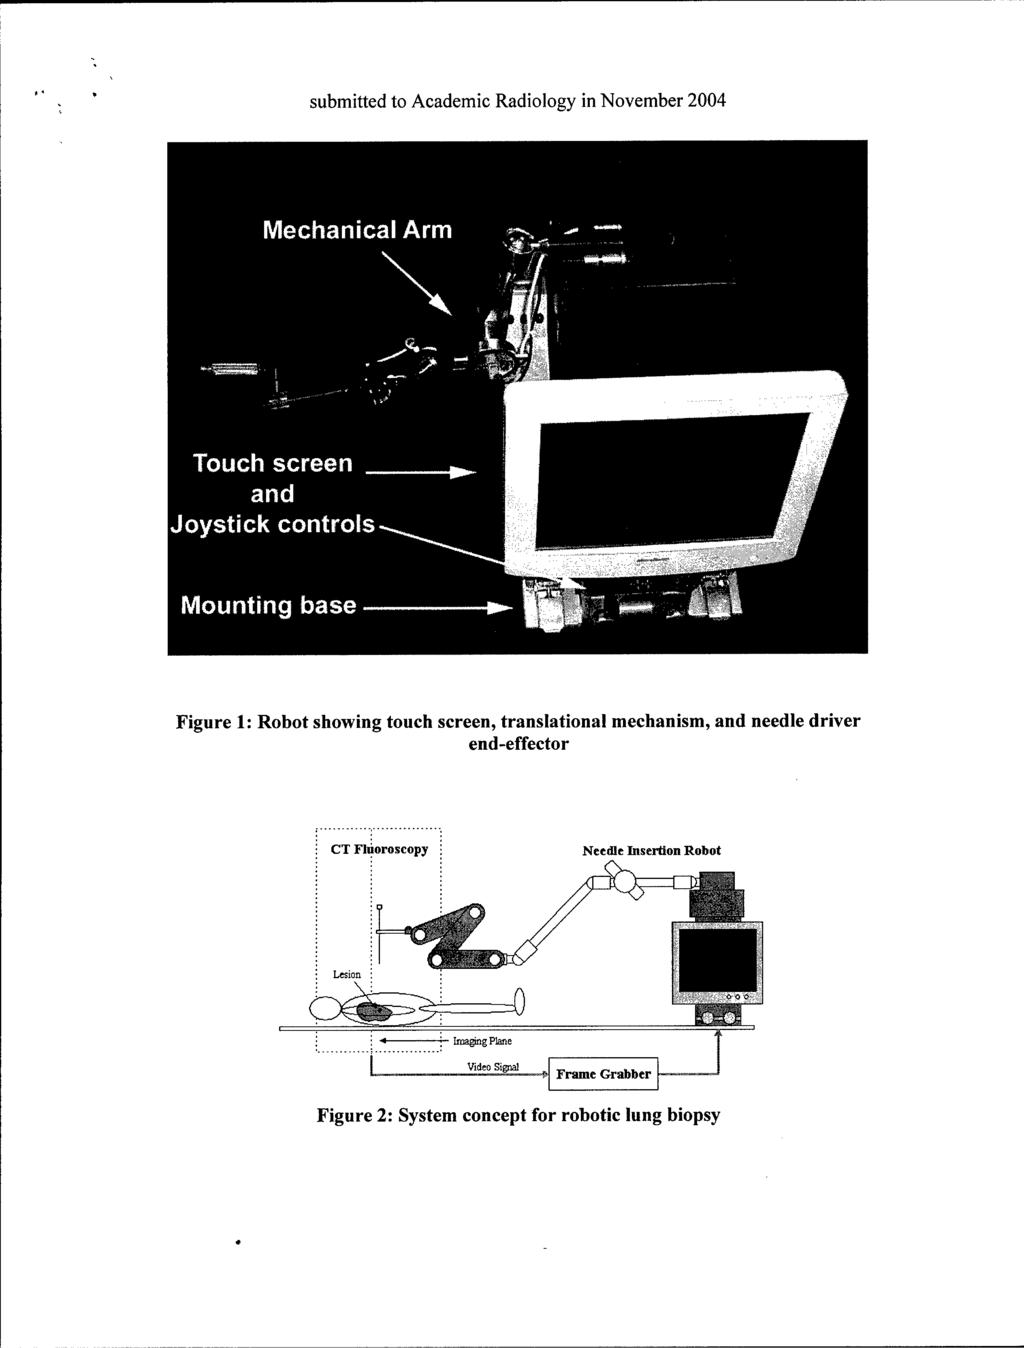 submitted to Academic Radiology in November 2004 Figure 1: Robot showing touch screen, translational mechanism, and needle driver end-effector CT